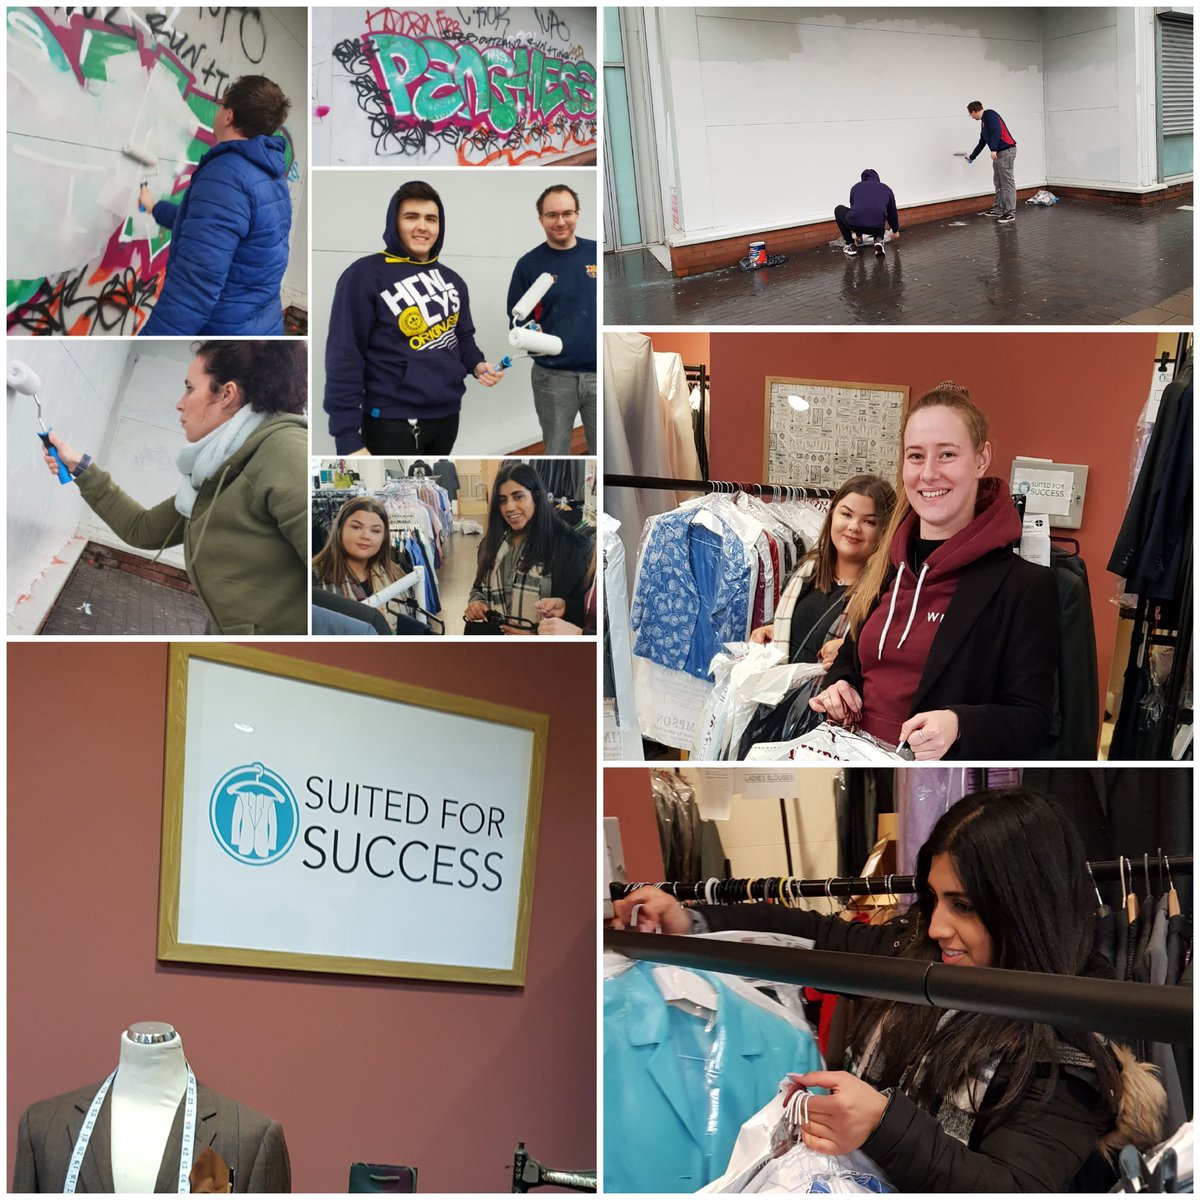 Another great day volunteering at @SuitedForBham on Tuesday. Thank you to the Enterprise team for all your hard work! @U2Diversity #U2Good2betrue #community